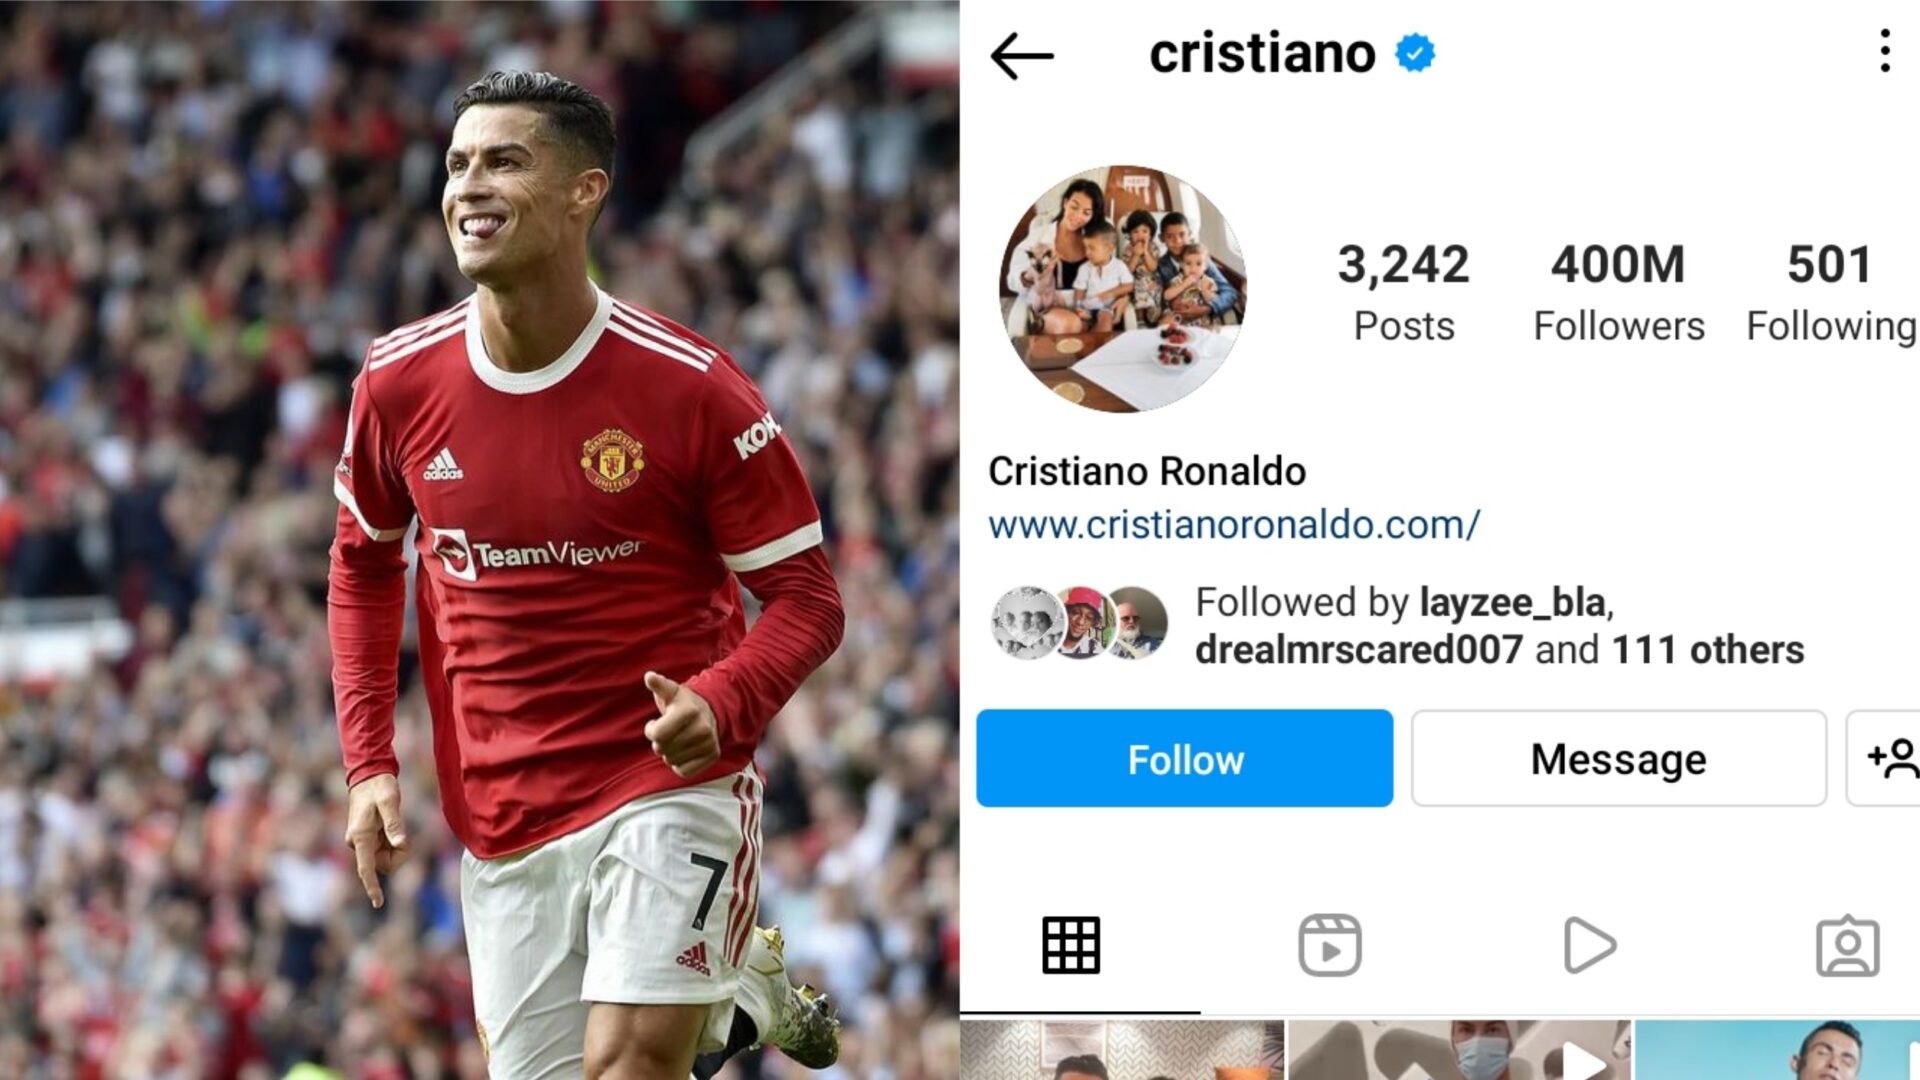 Cristiano Ronaldo becomes the first person in the world to hit 400 million  followers on Instagram